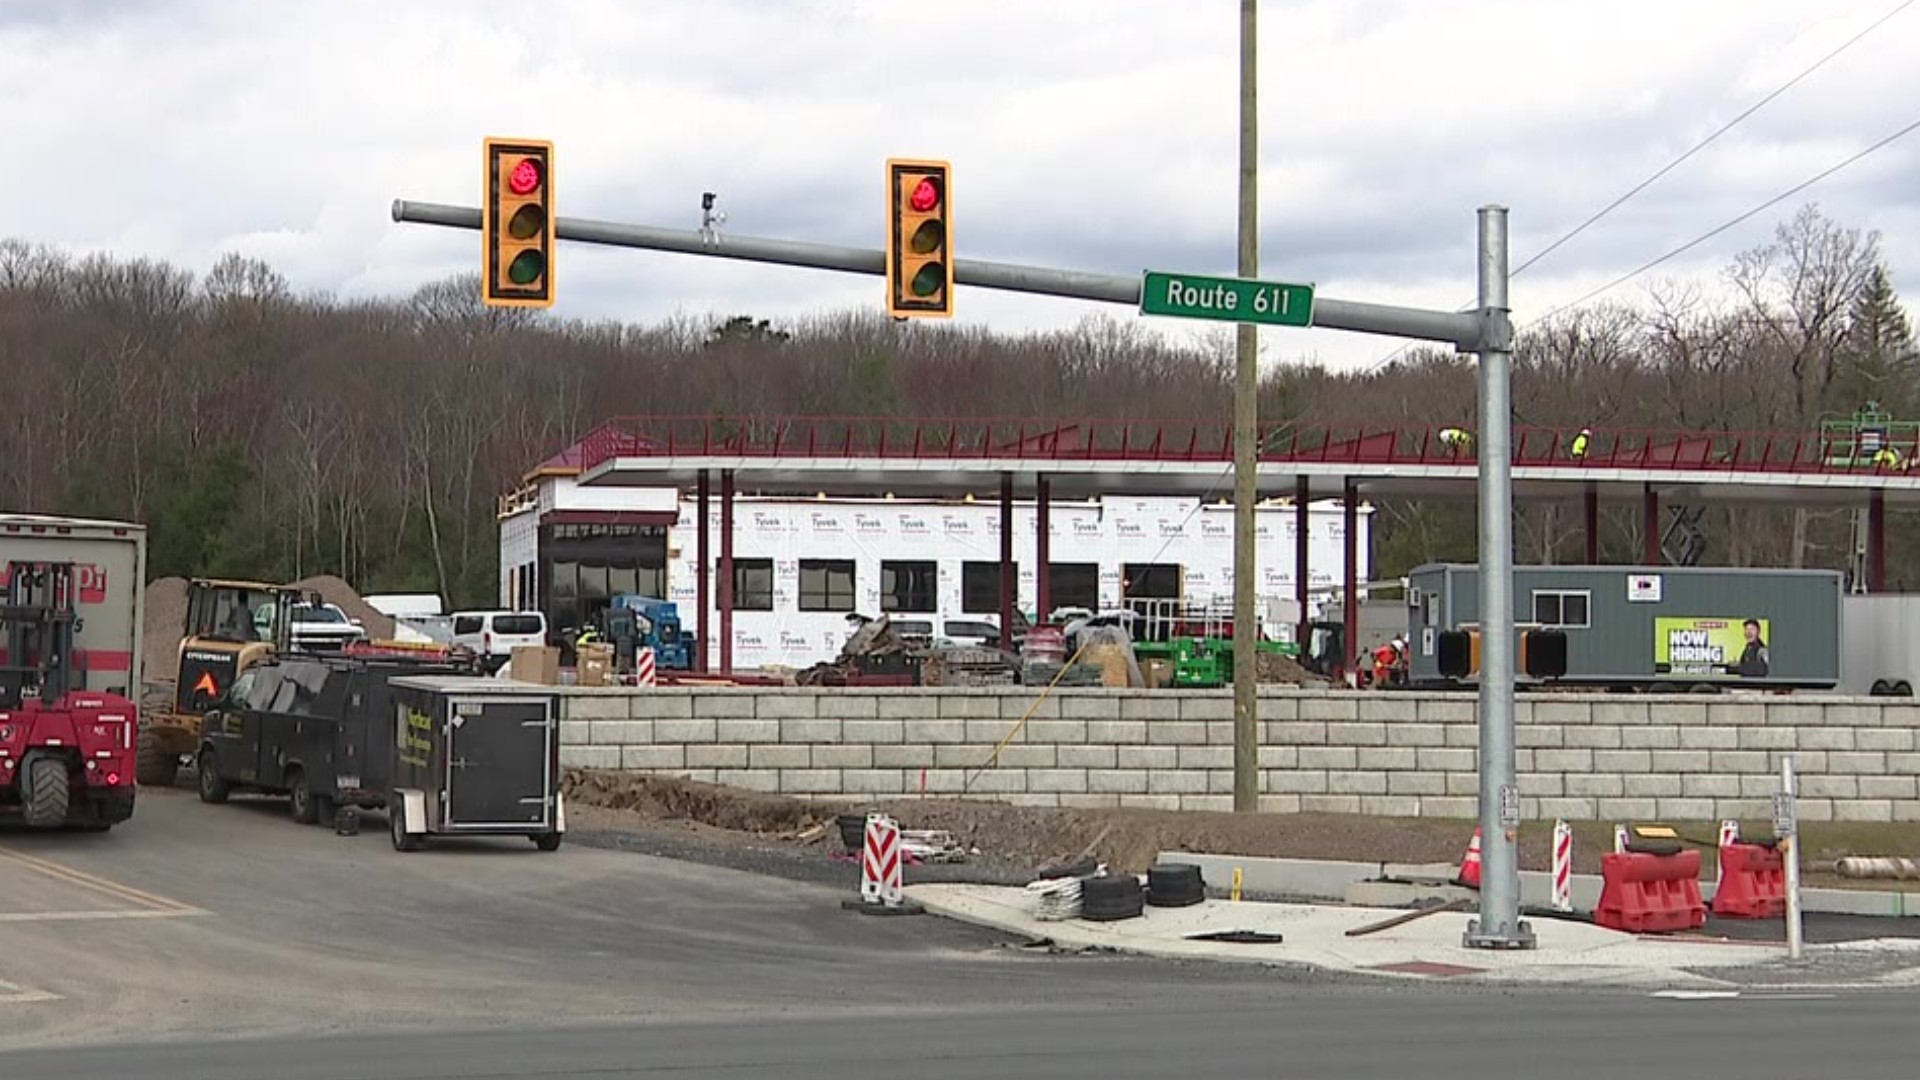 The popular convenience store chain is being built on Route 611 near Swiftwater.